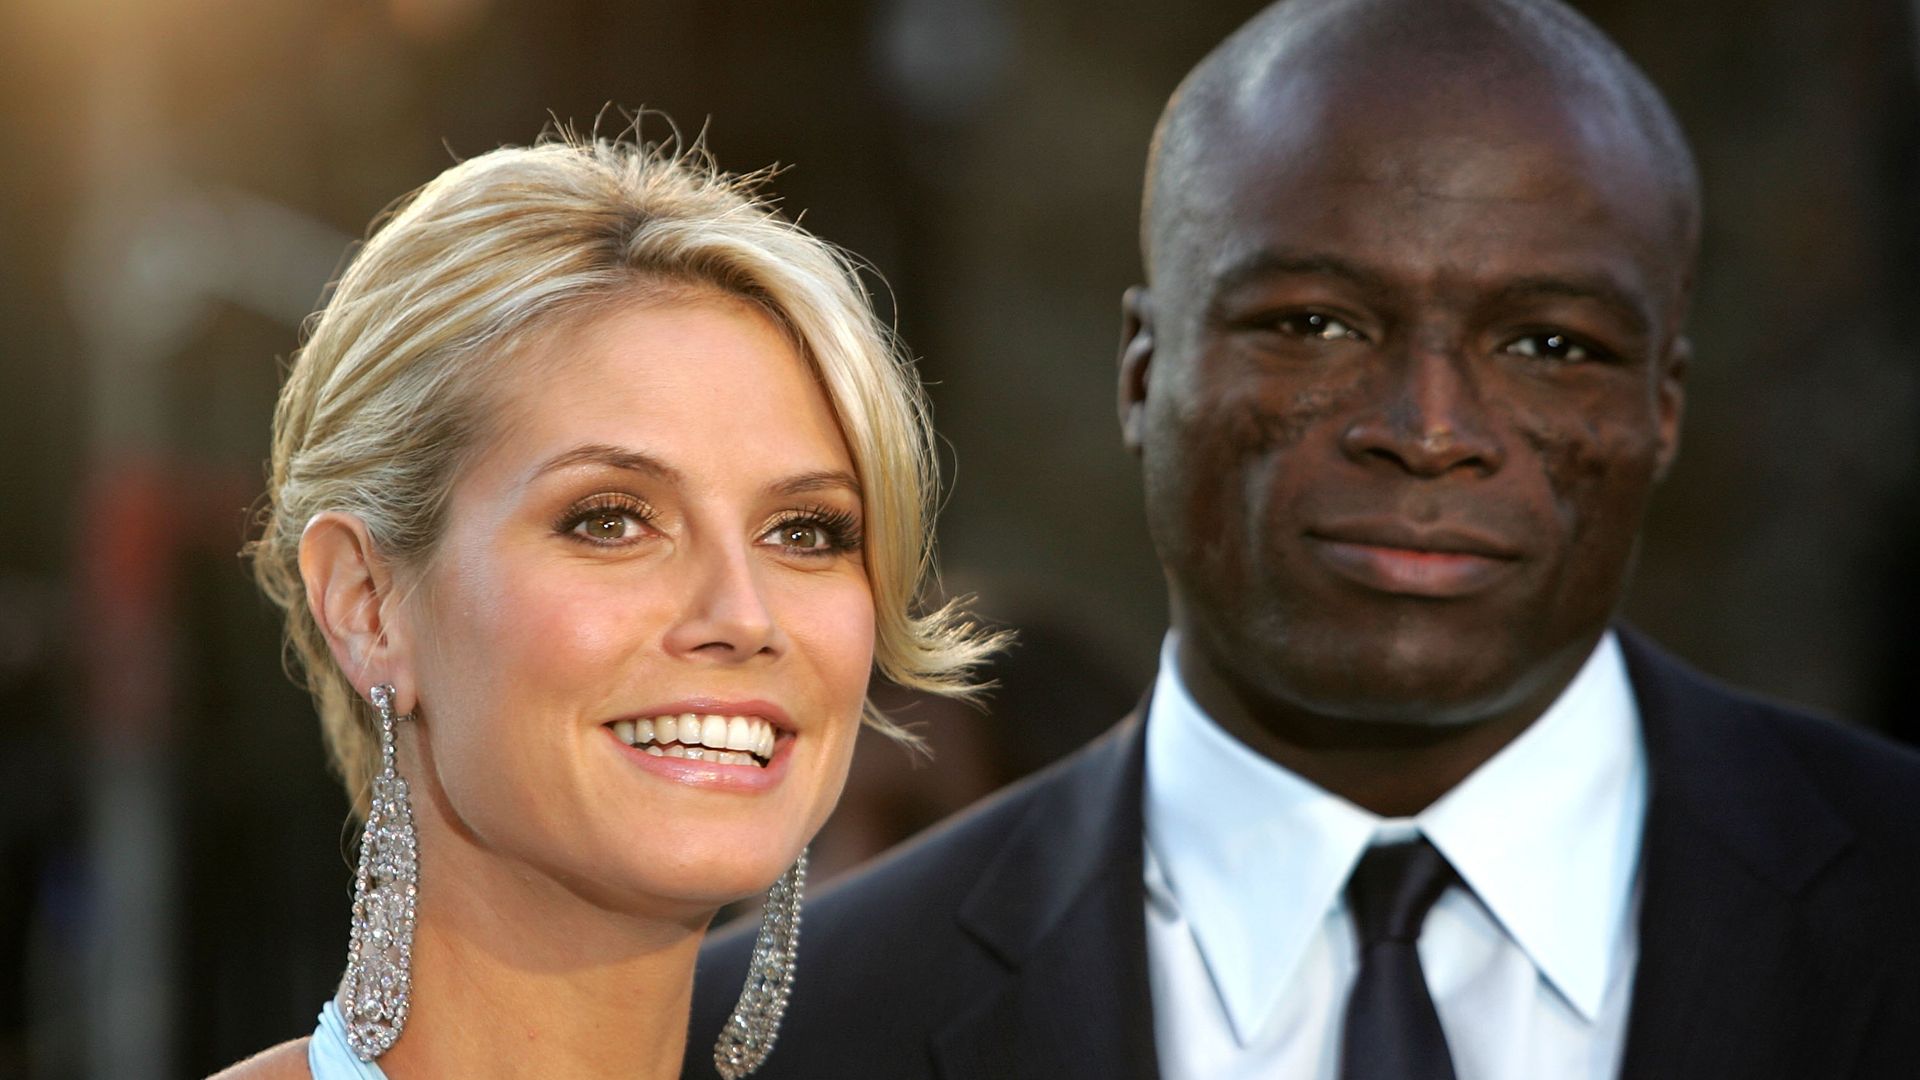 Heidi Klum and Seal's son Henry gives revealing insight into relationship with famous dad in rare home photo